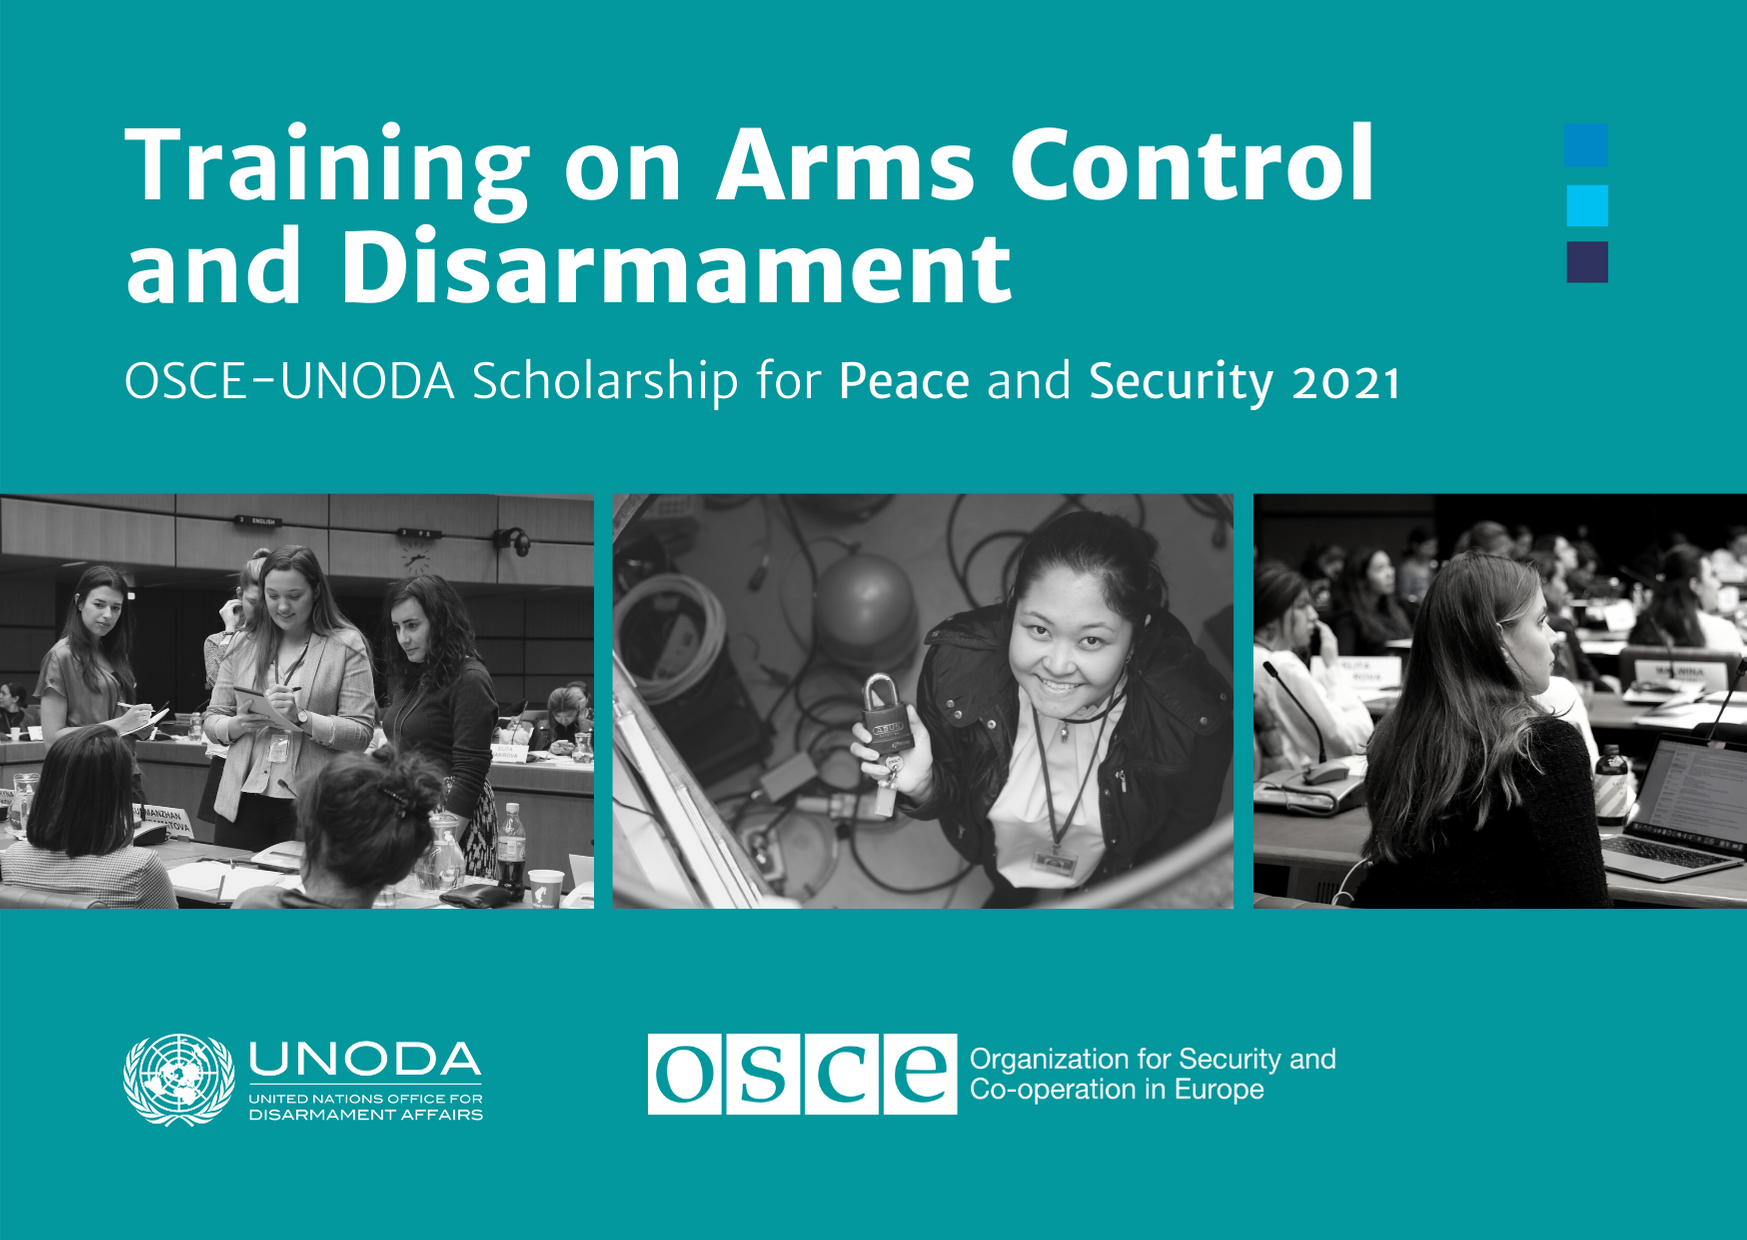 UNODA/OSCE CPC Education: Scholarship for Peace and Security 2021 - Training on Arms Control and Disarmament CPC01POLMIL